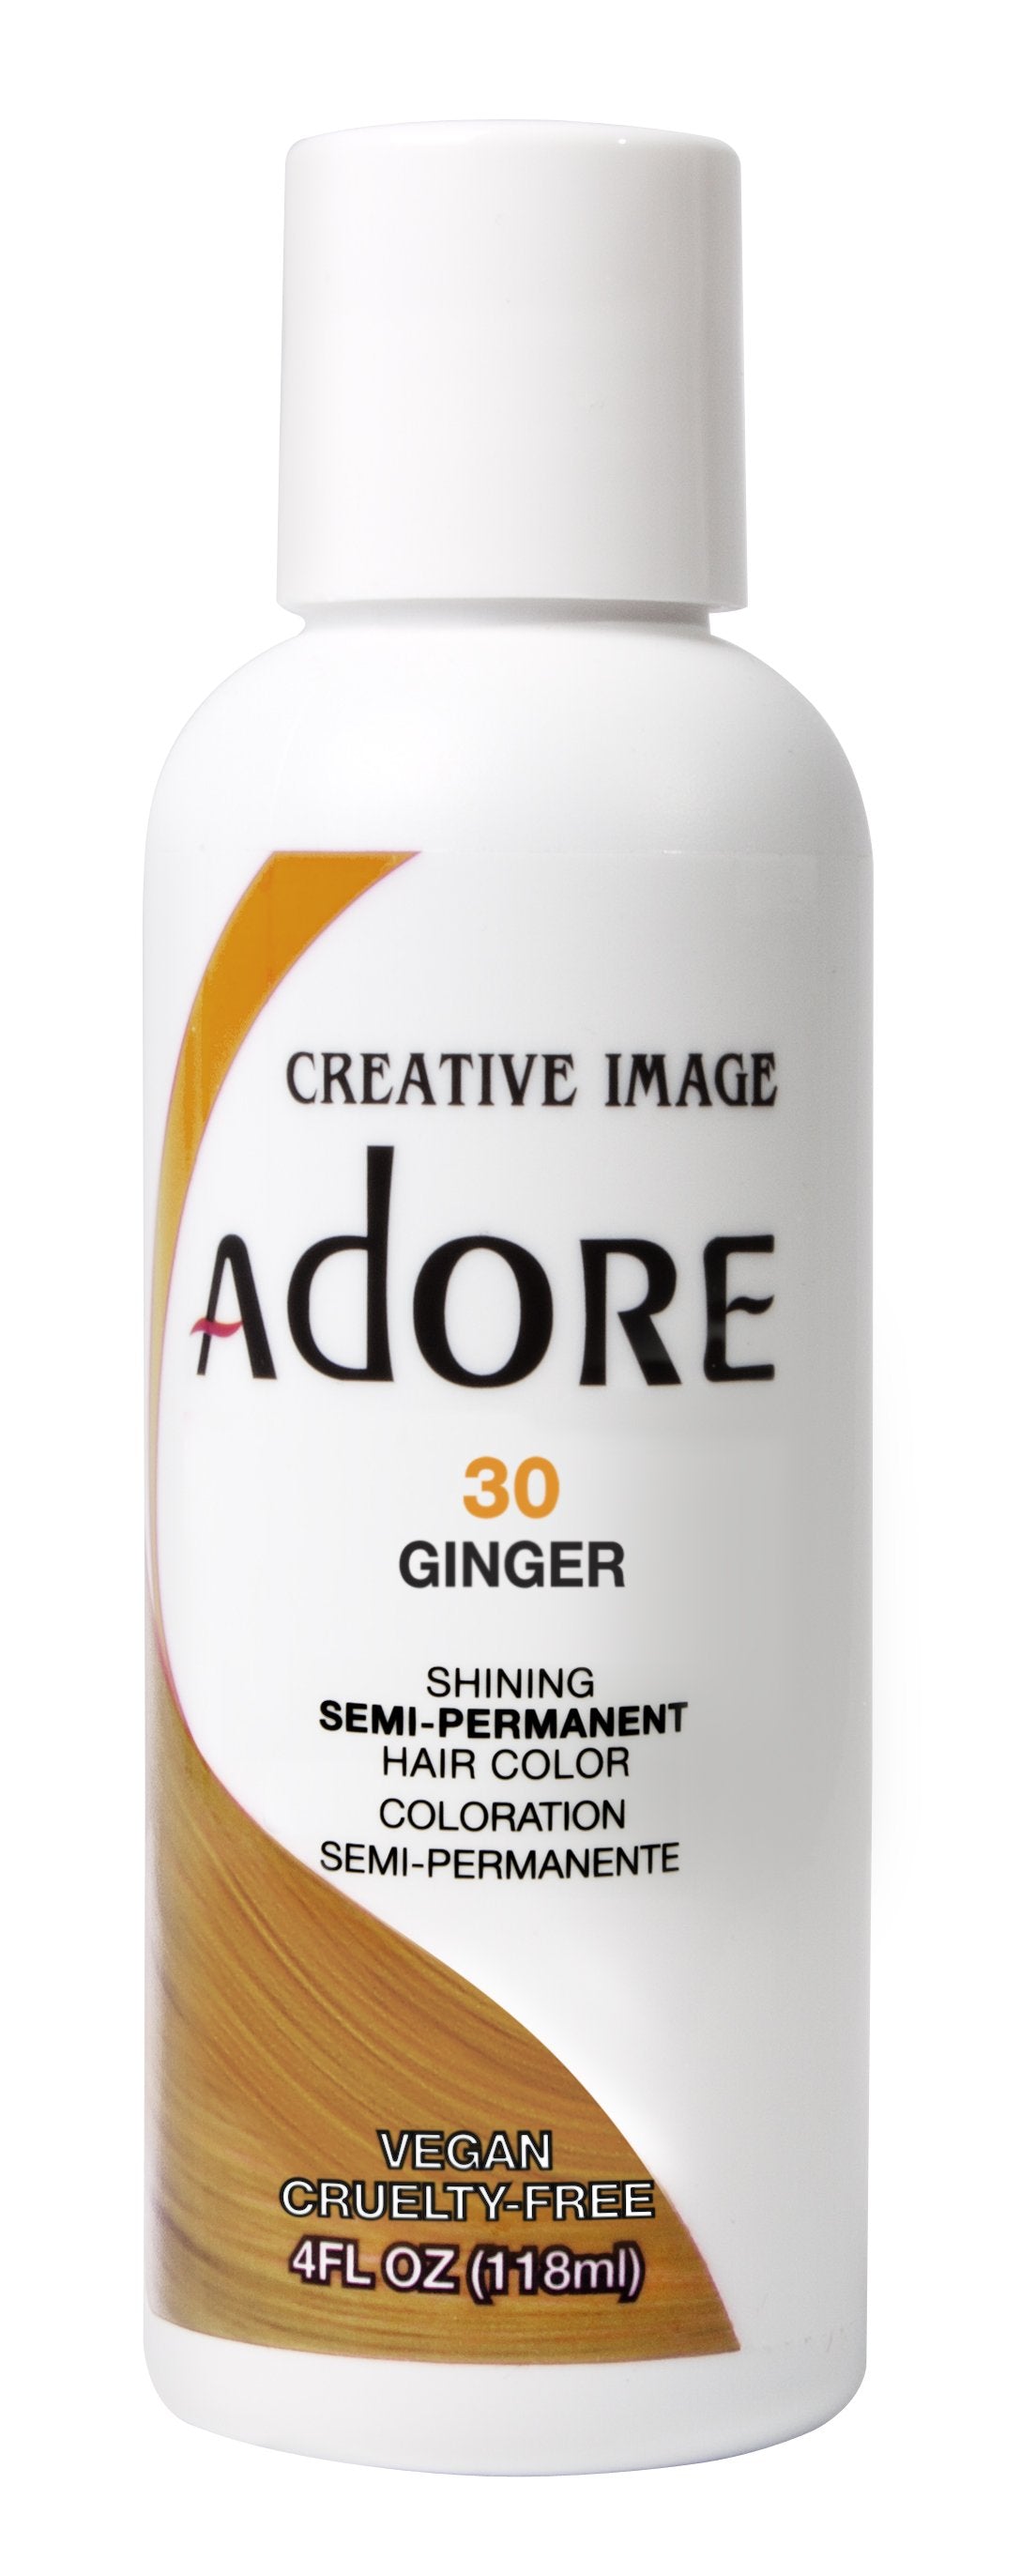 Adore #30 Ginger